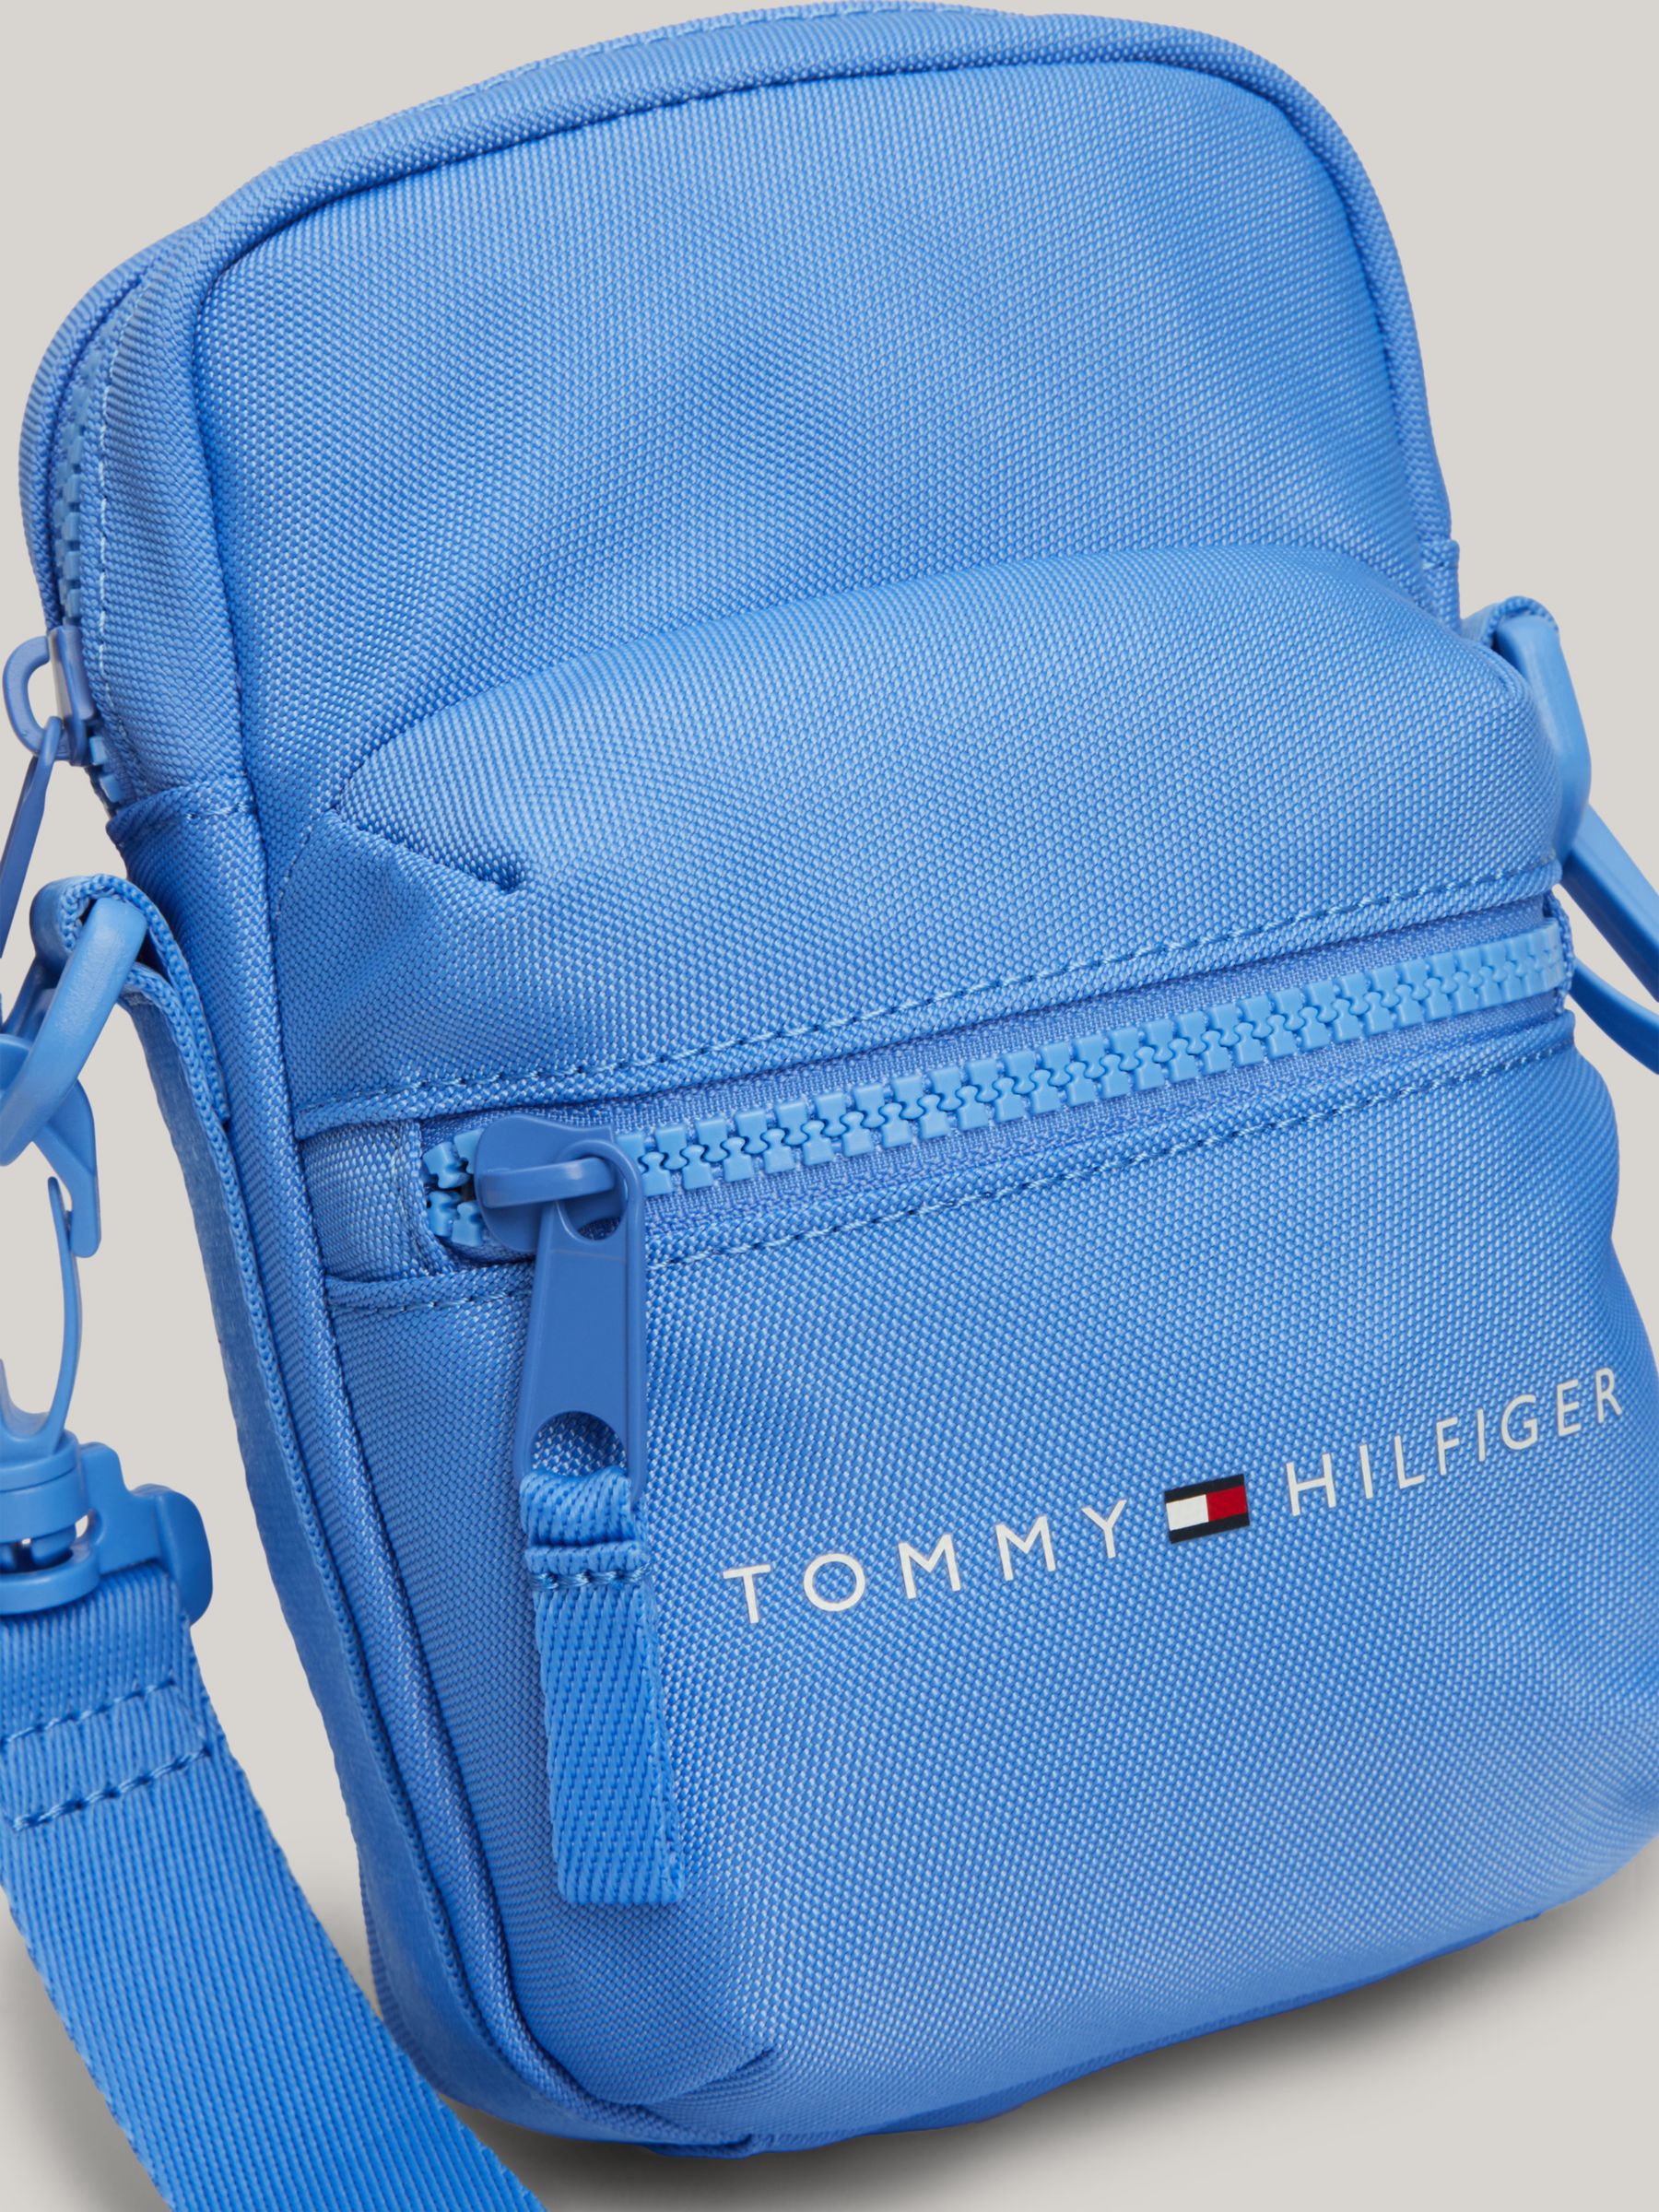 Tommy Hilfiger Kids' Mini Reporter Bag, Blue Spell, One Size